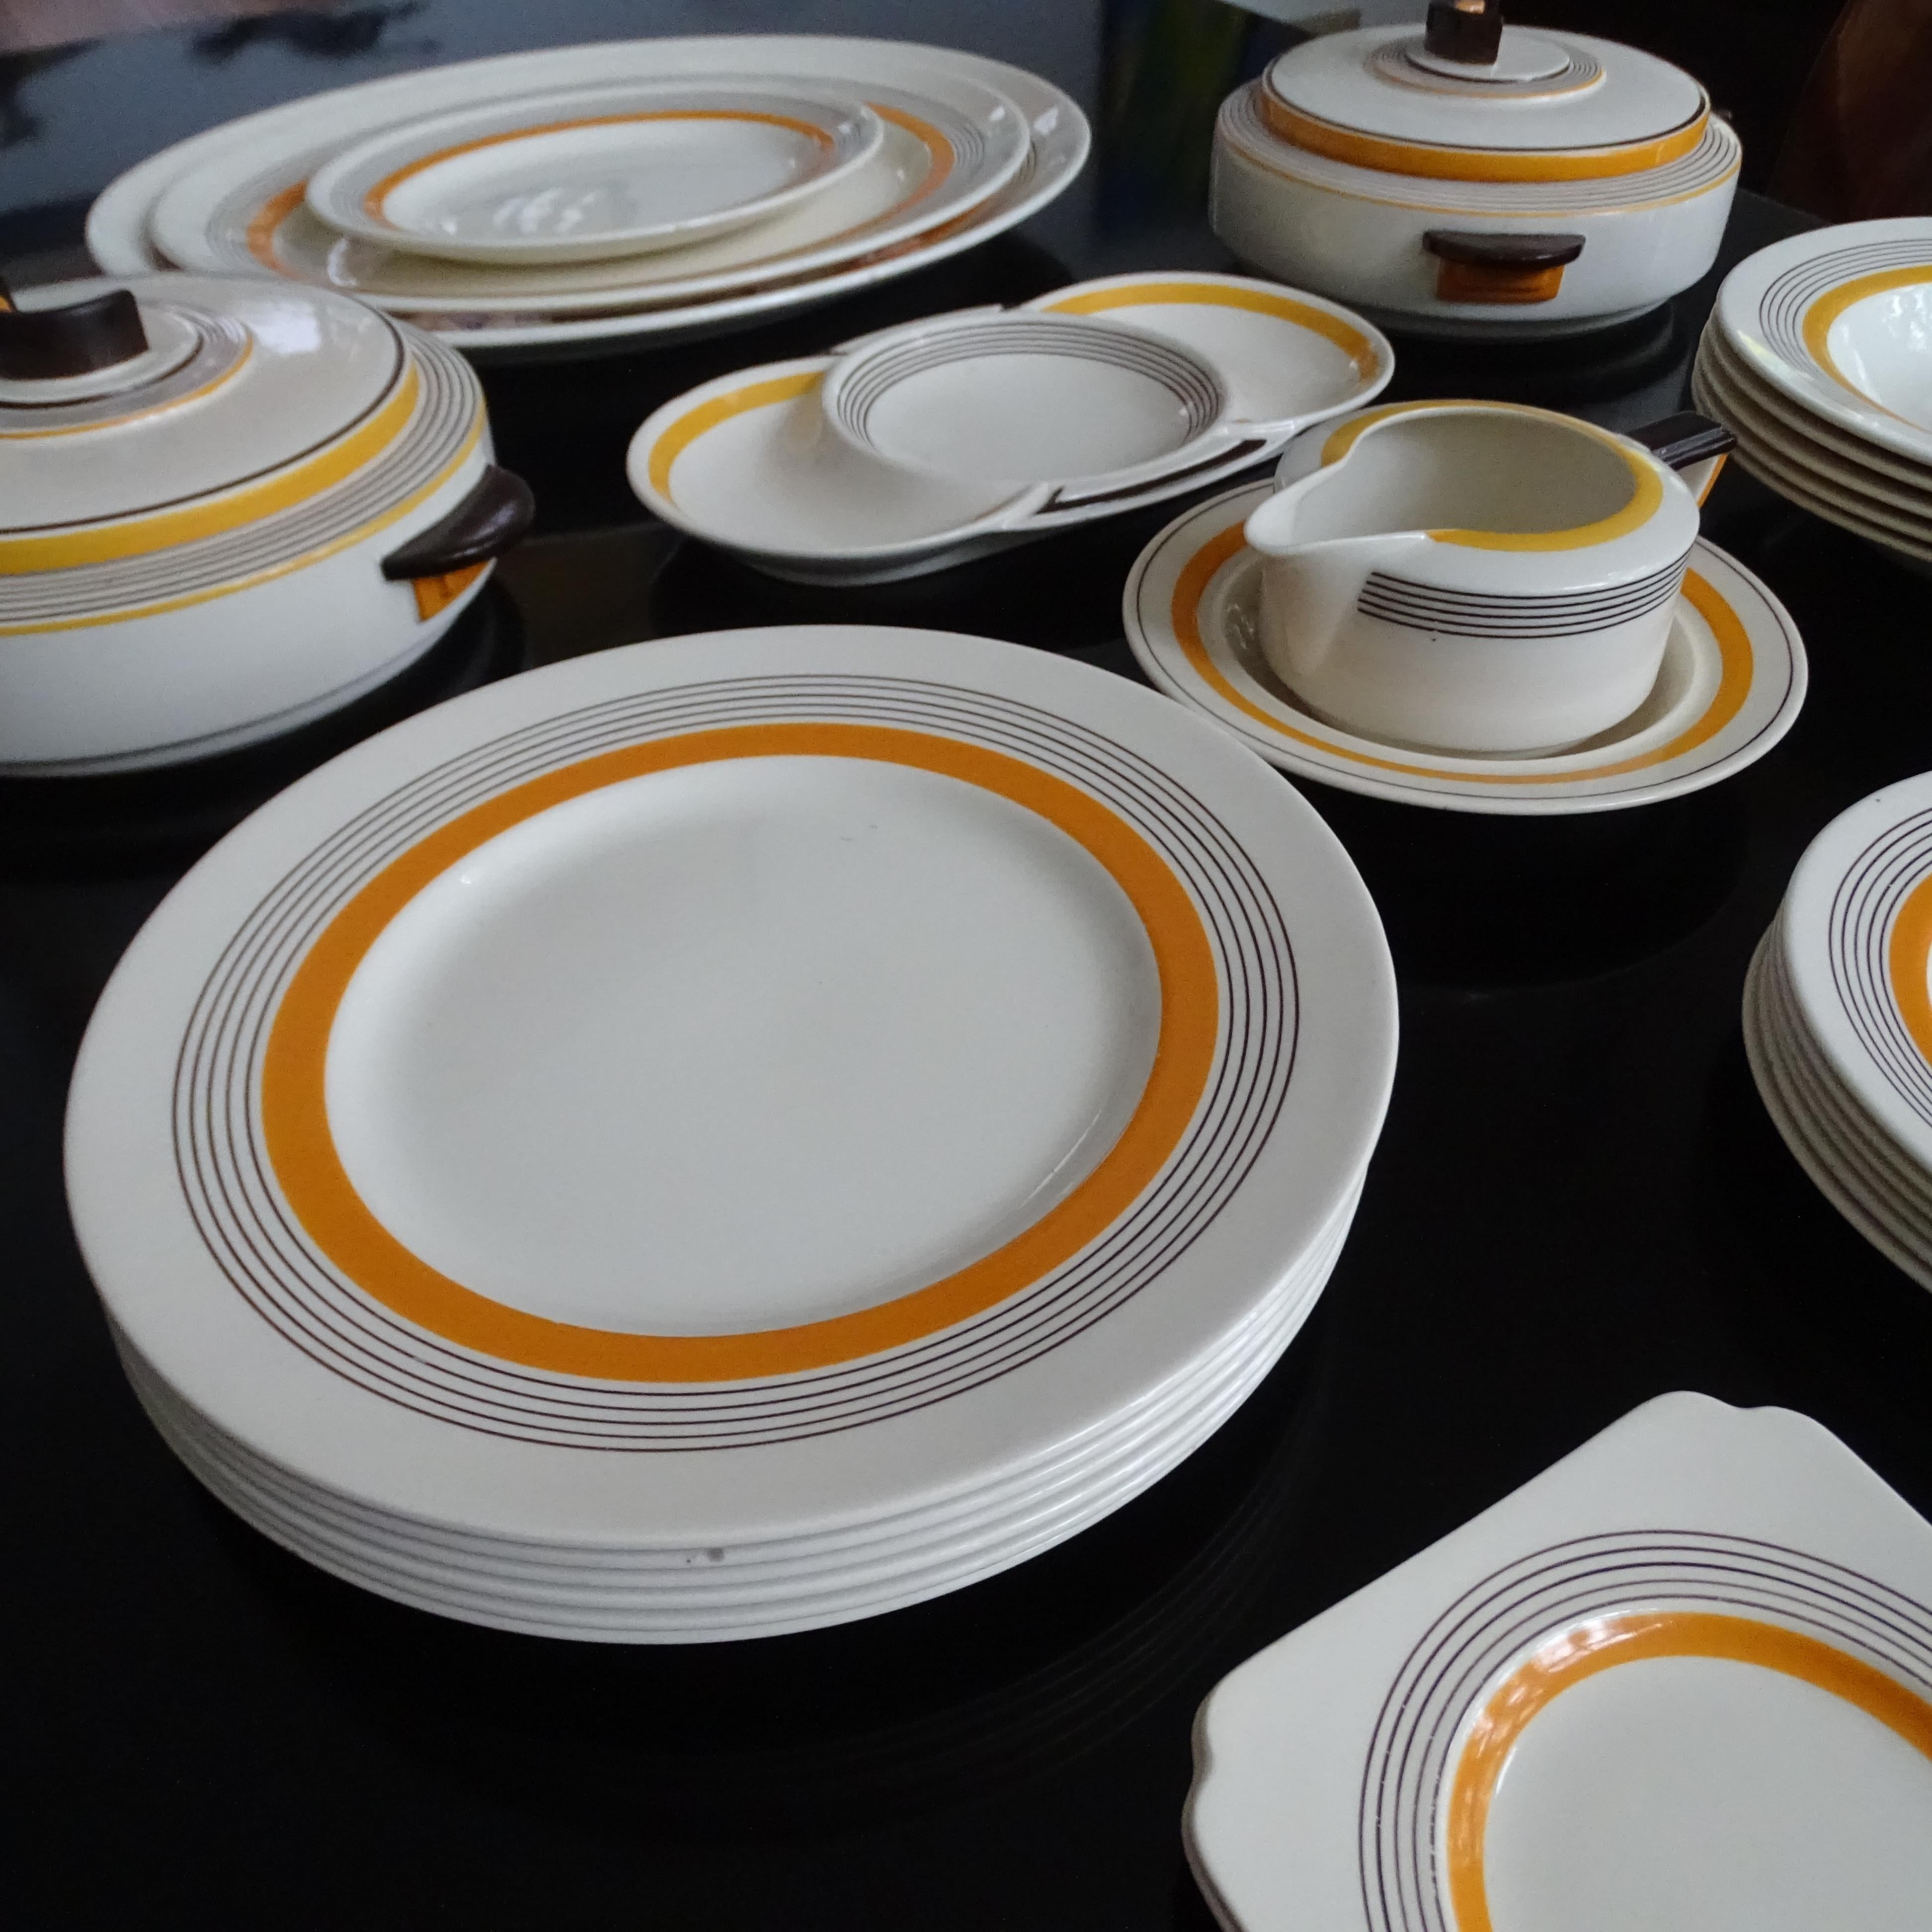 Mid-20th Century Art Deco Modernist 27-Pcs Royal Doulton England China Dinnerware Service For Sale